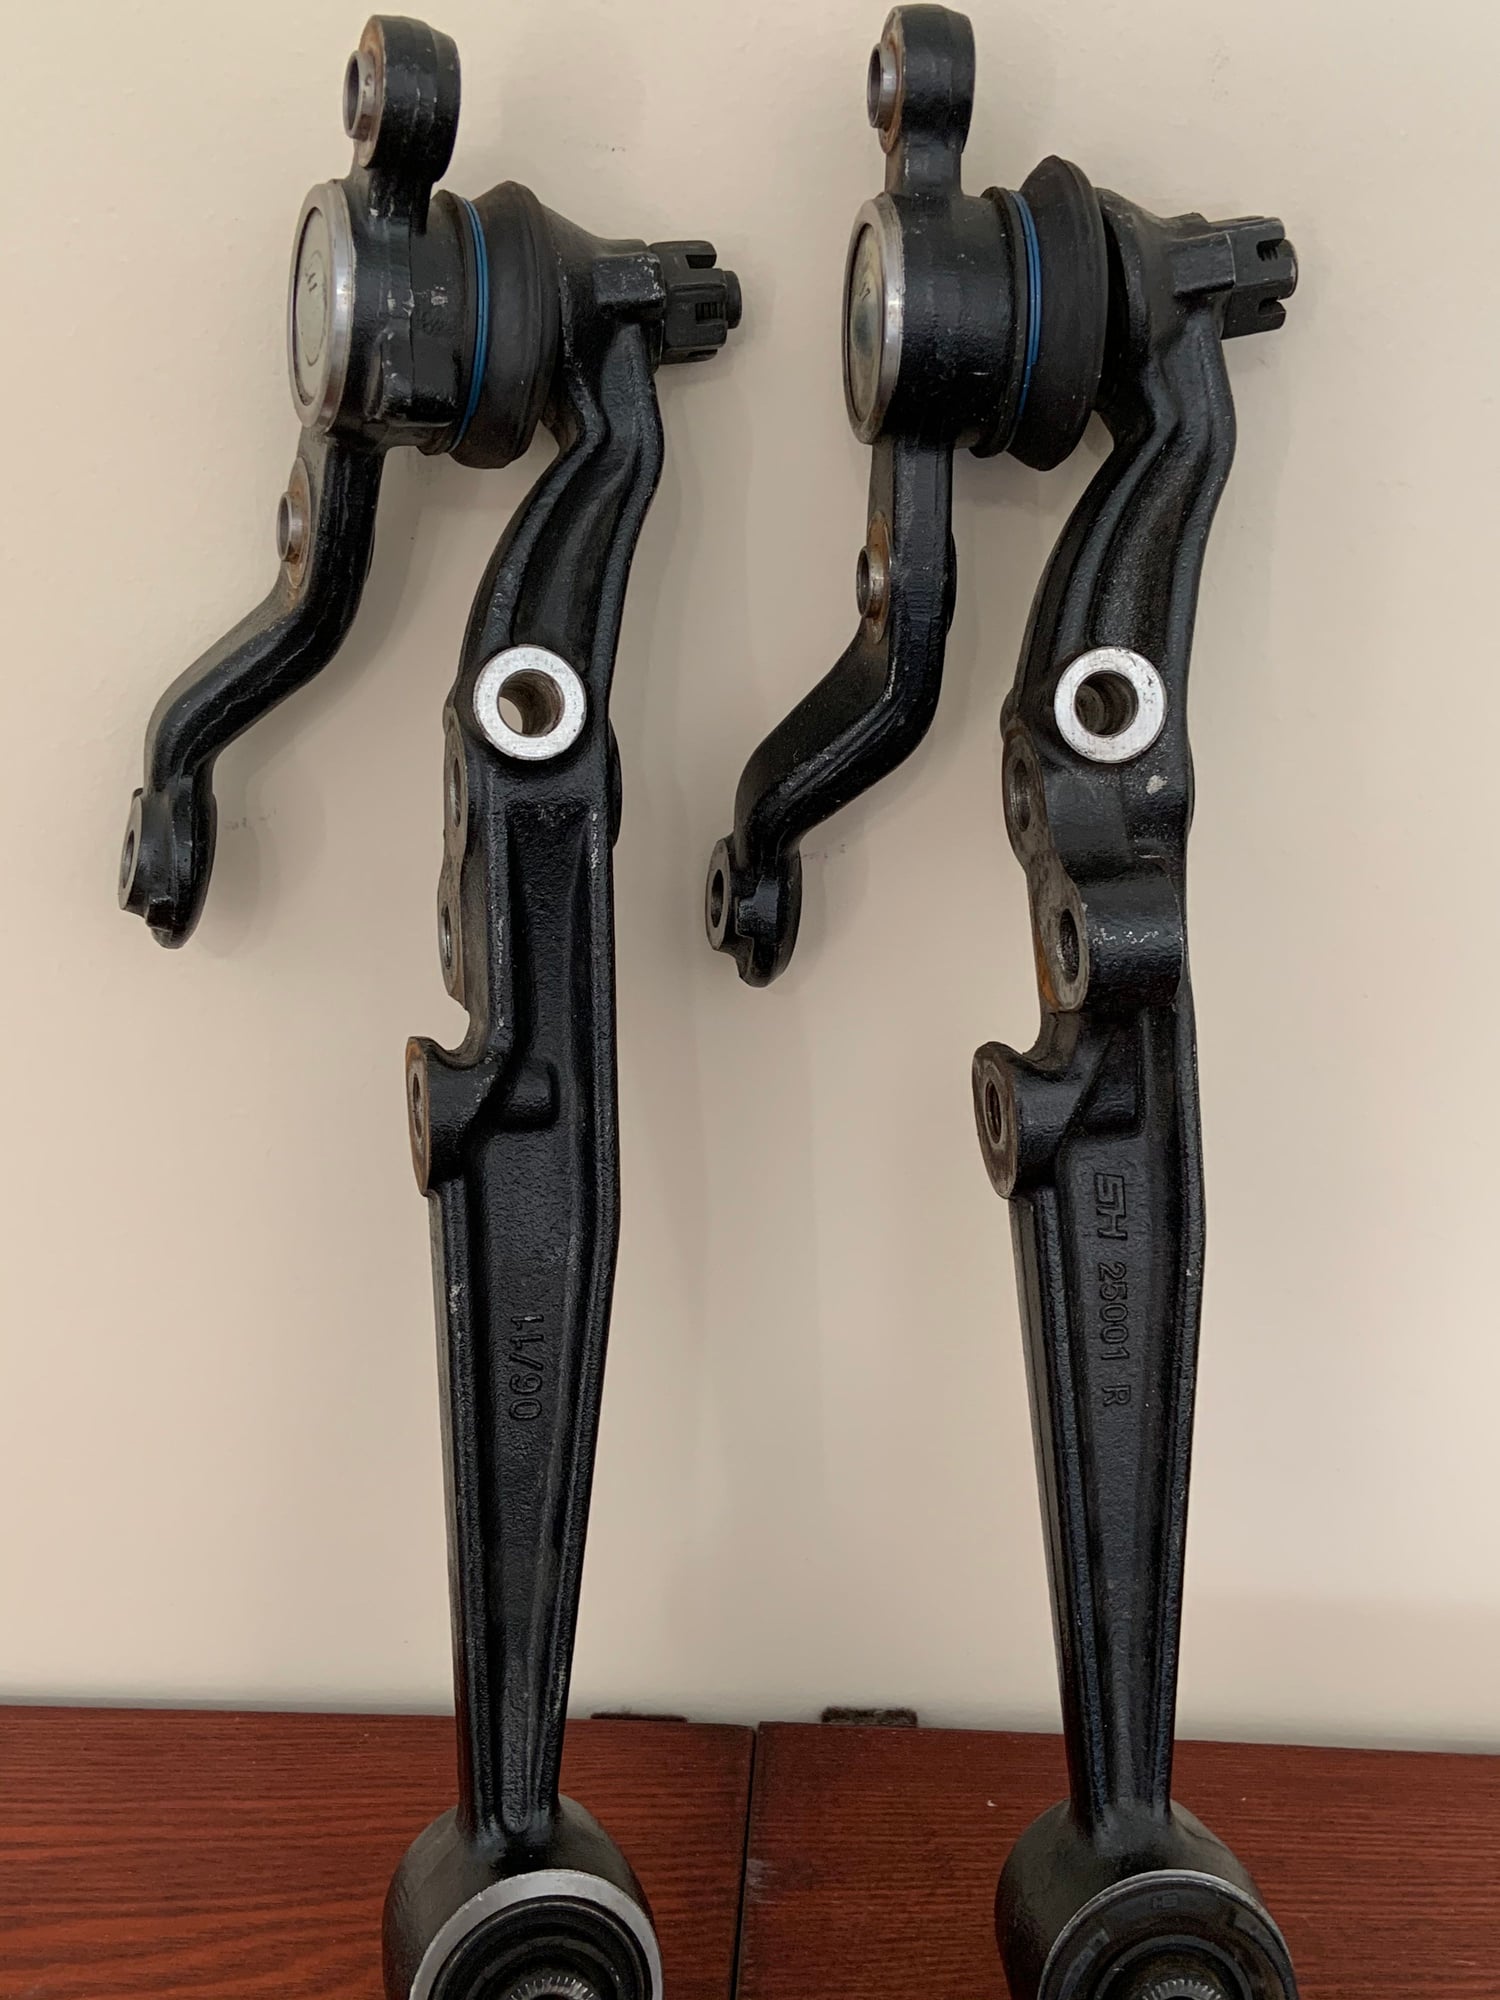 Steering/Suspension - Struts and lower control arm/ball joints for SC430 - Used - 2004 to 2012 Lexus SC430 - Atlanta, GA 30301, United States